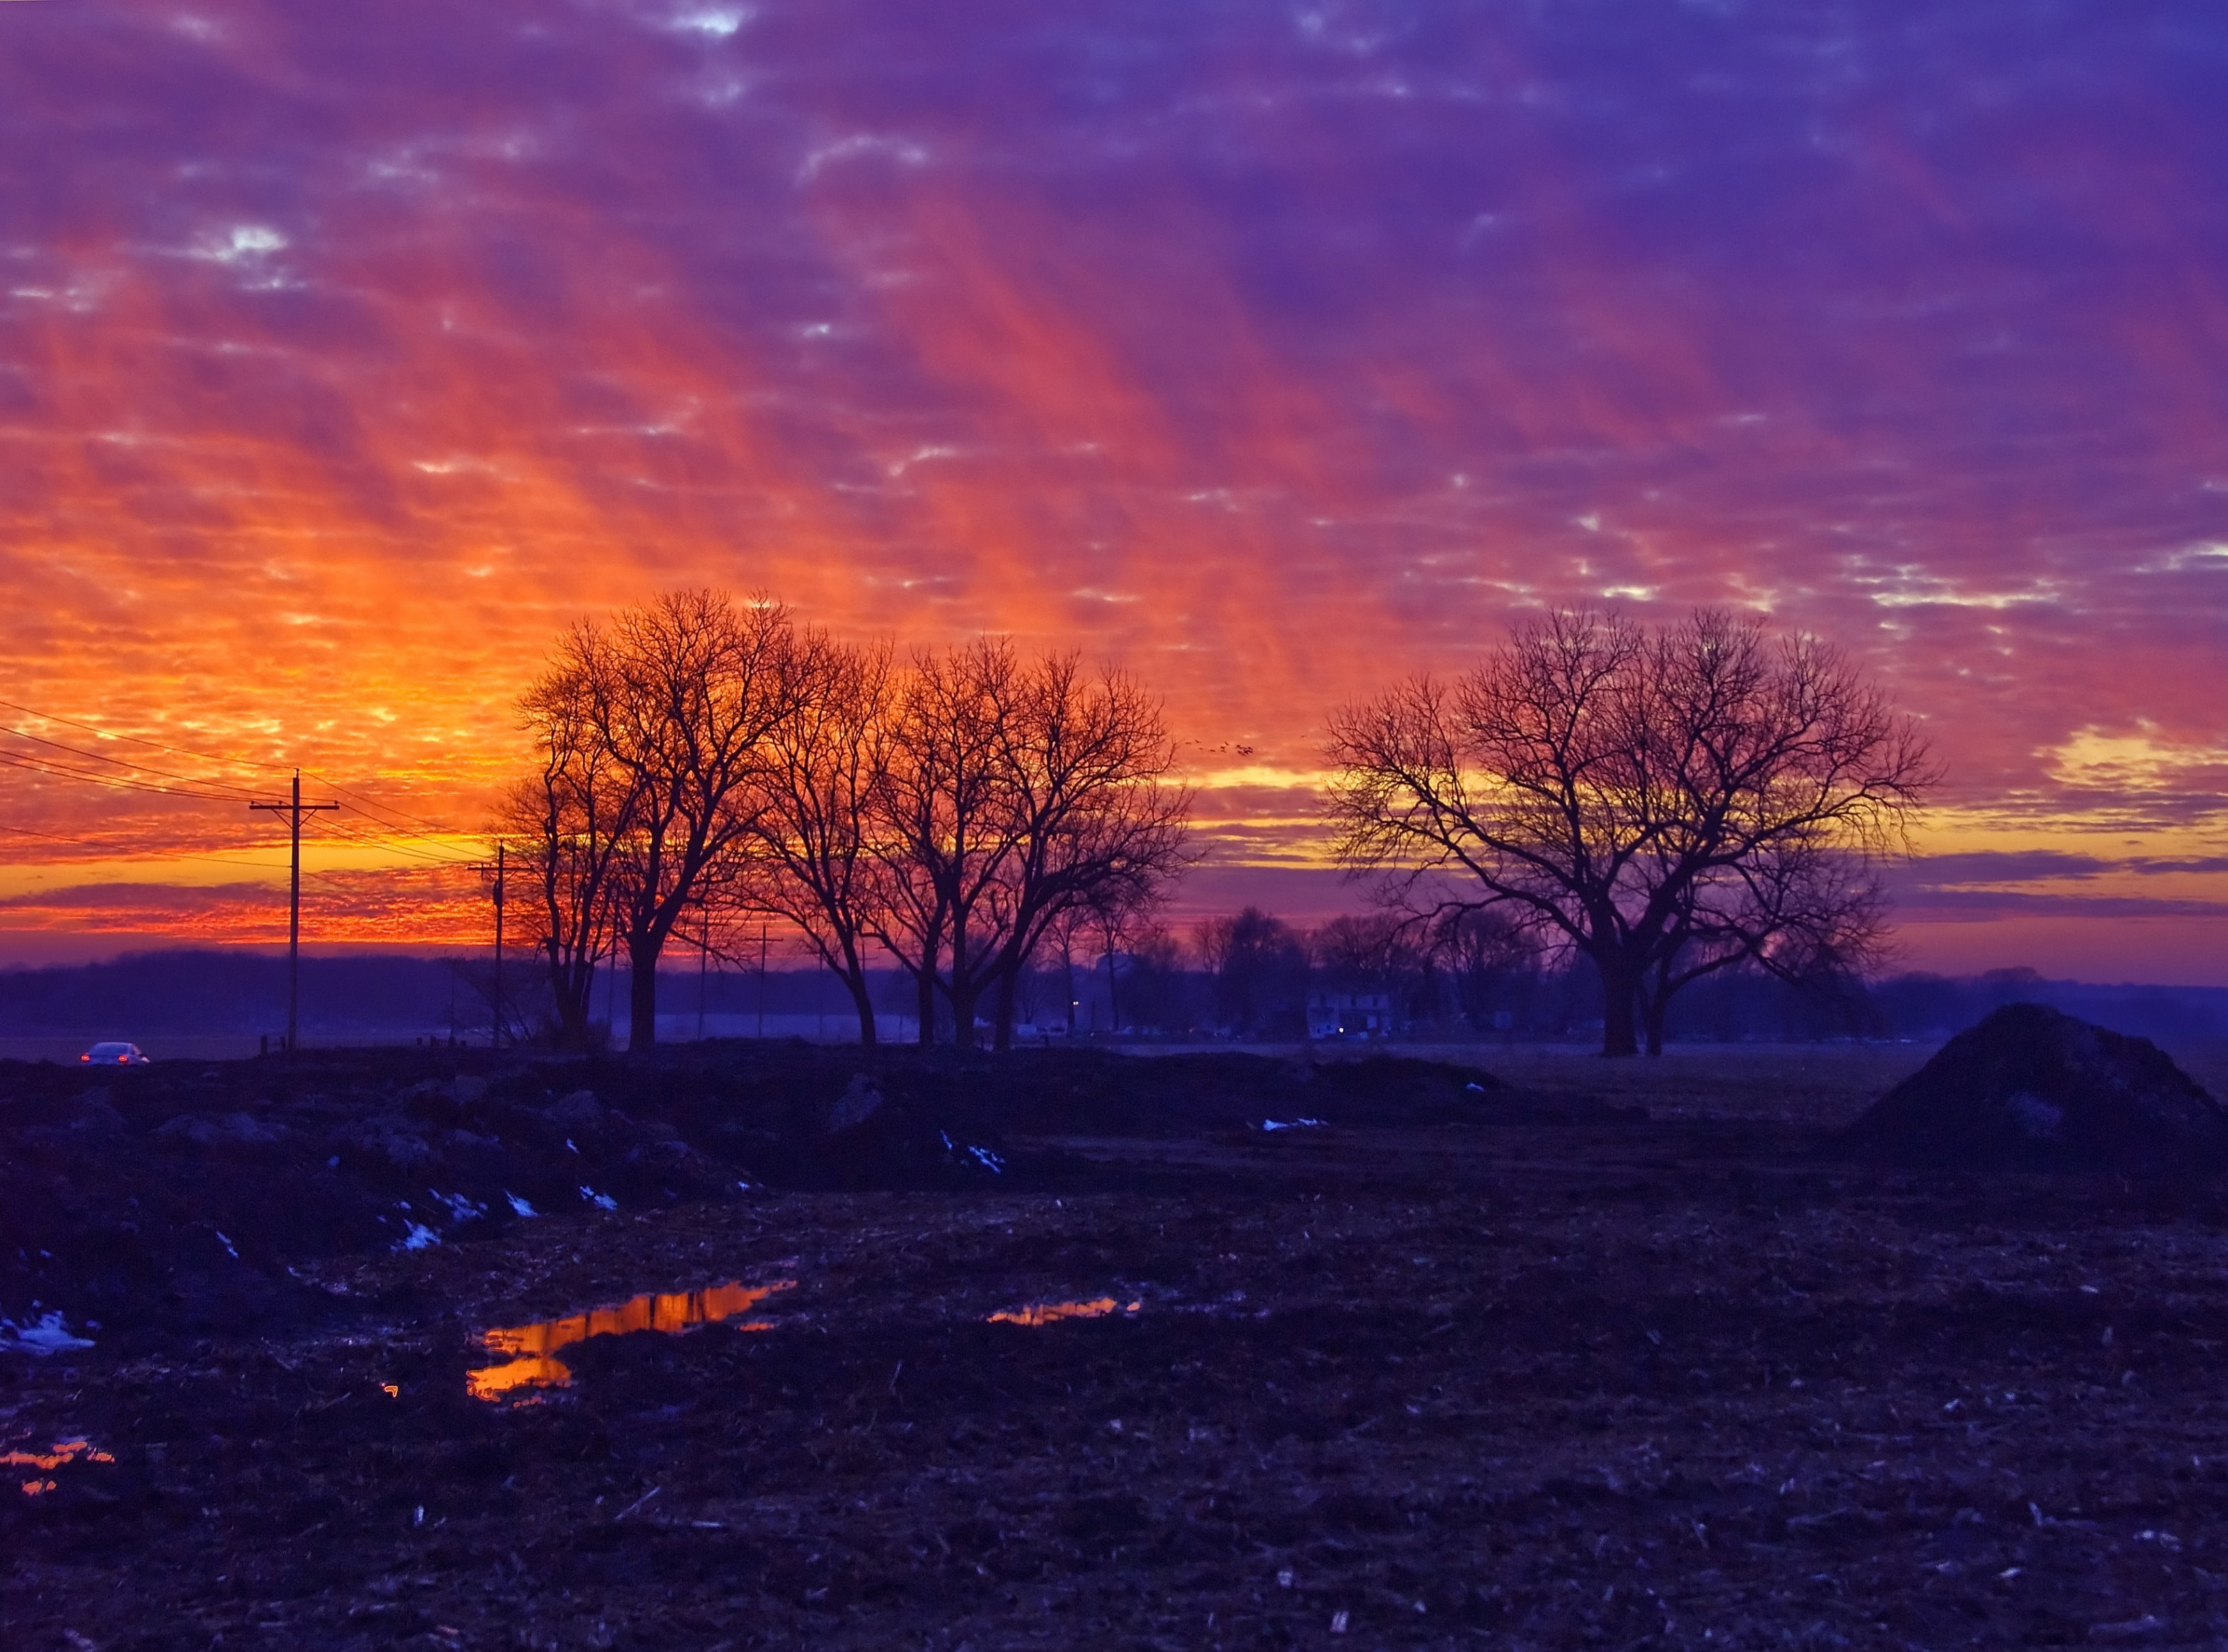 Ghost Riders In The Sky, withered trees, United States, Kansas